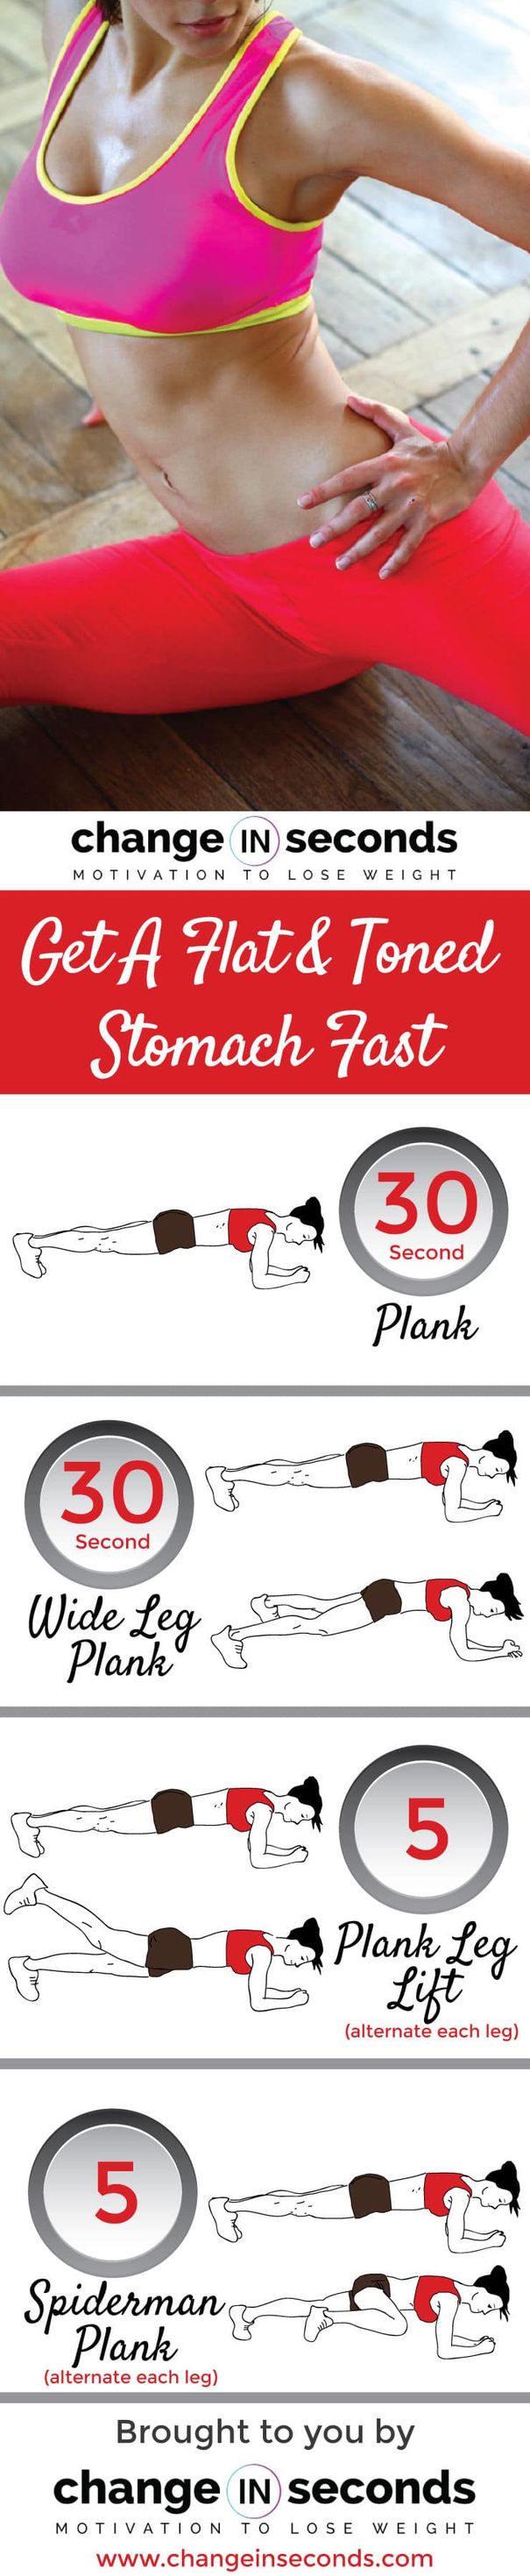 Flat And Toned Stomach Fast